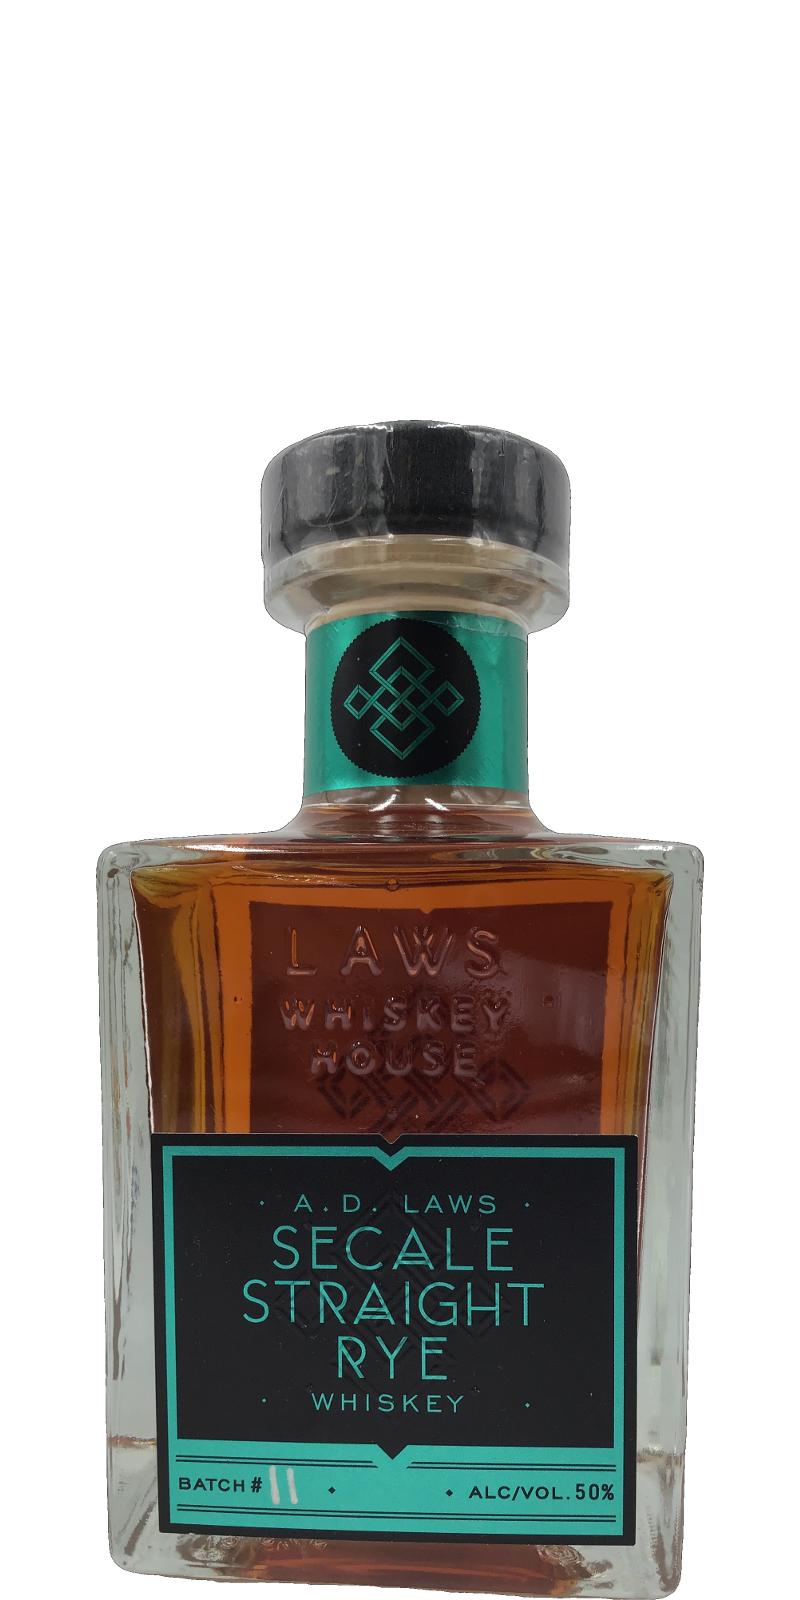 A. D. Laws Secale Straight Rye Whisky Batch 11 50% 375ml